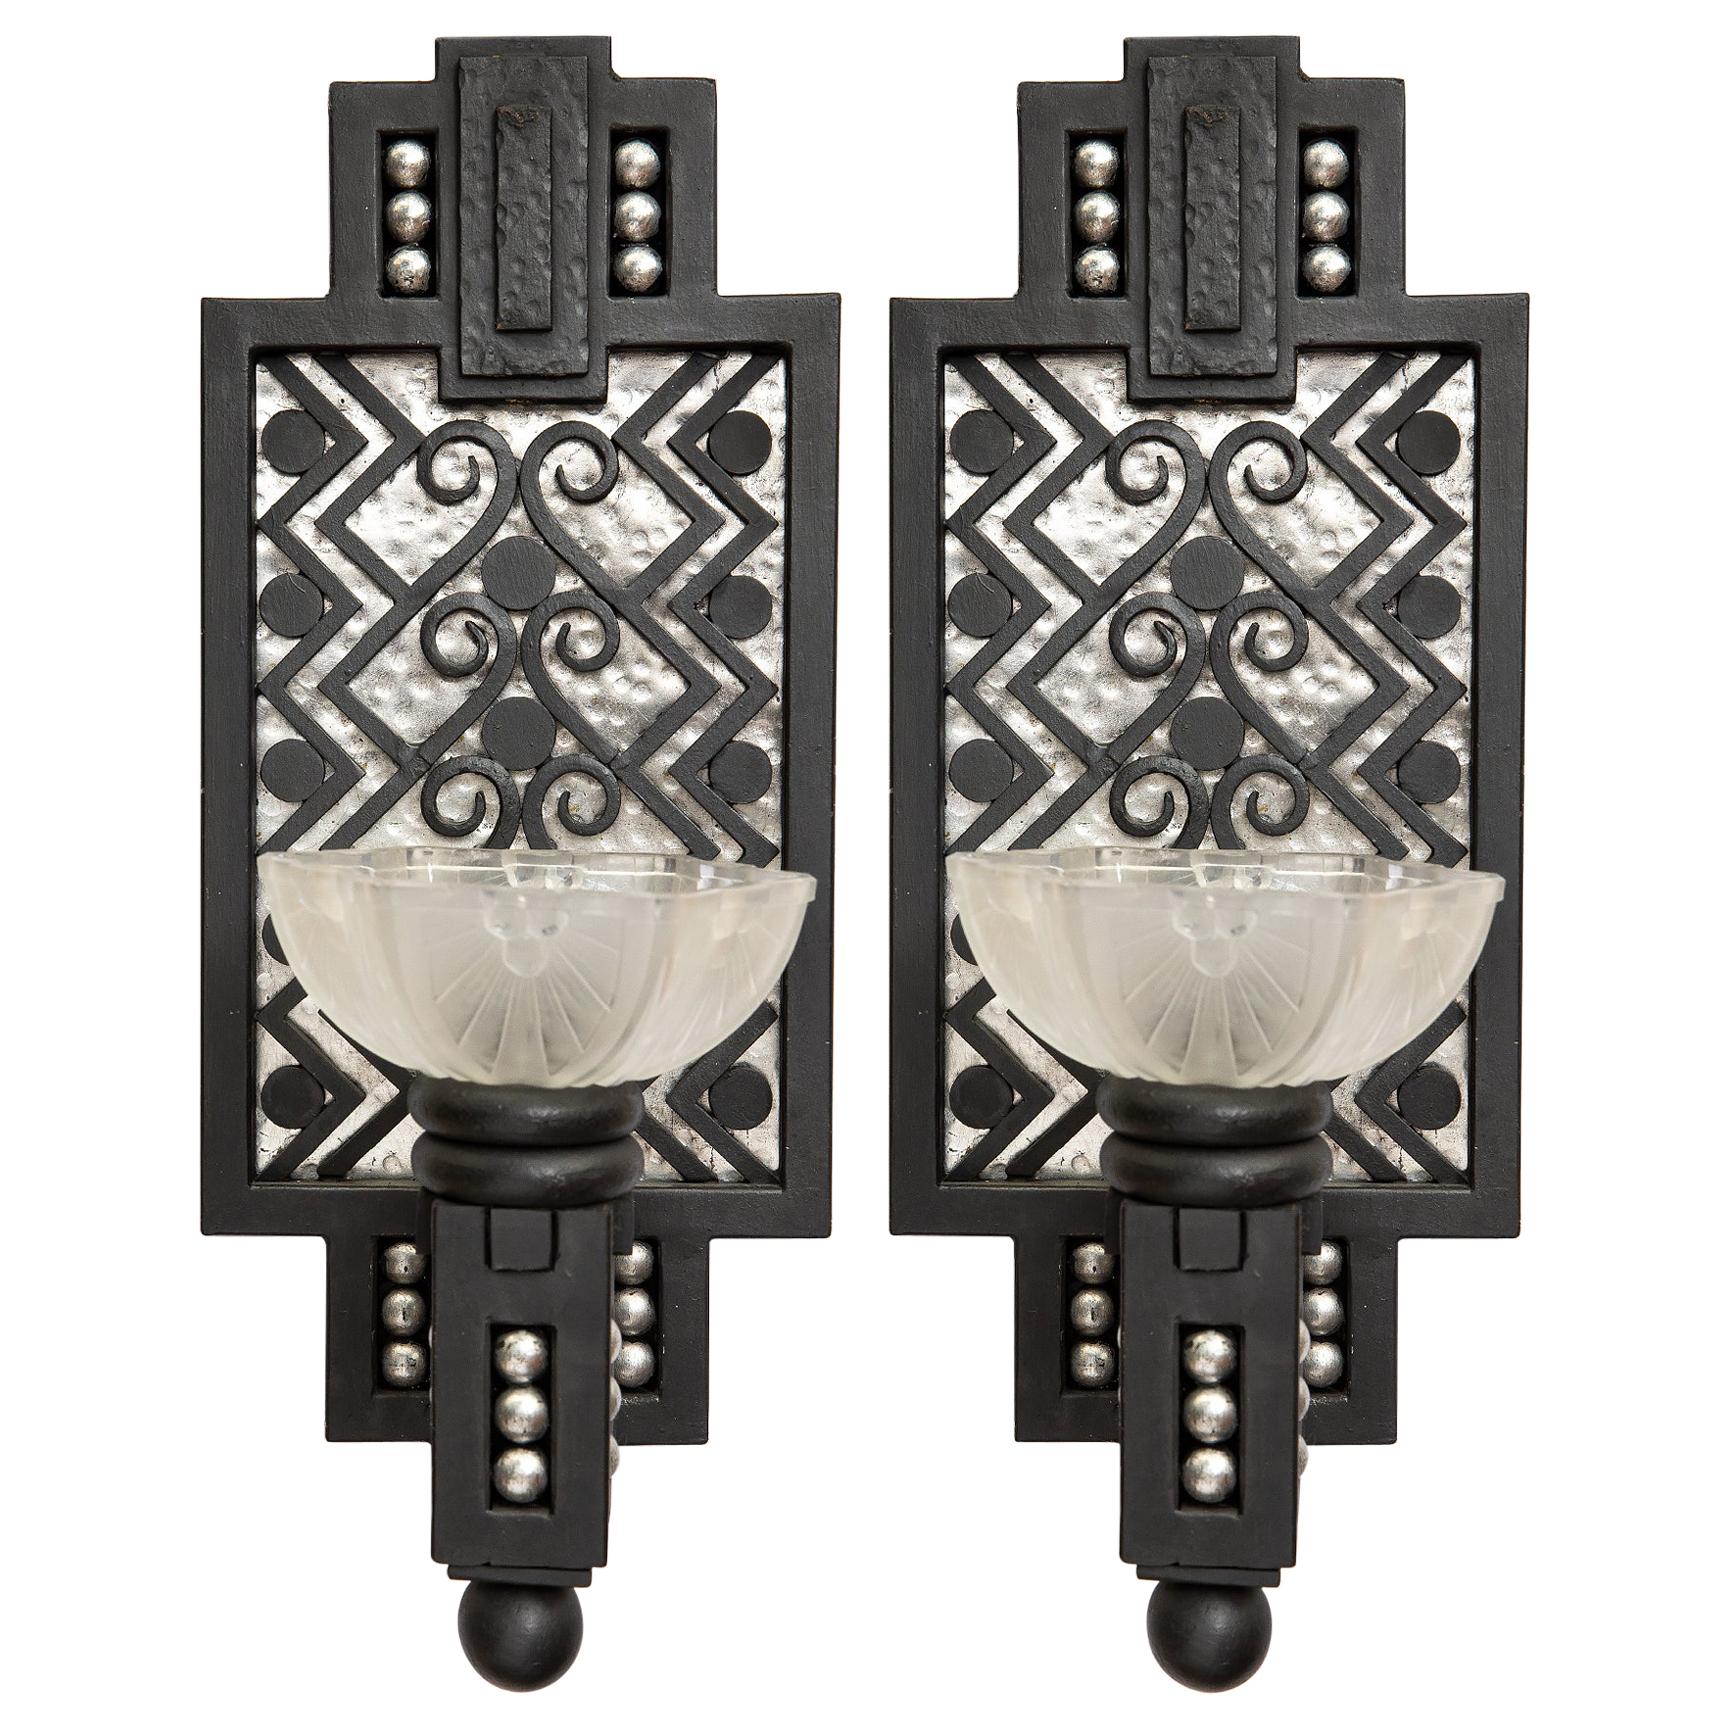 Pair of Wrought Iron and Glass Sconces, Art Deco Period, France, circa 1930 For Sale